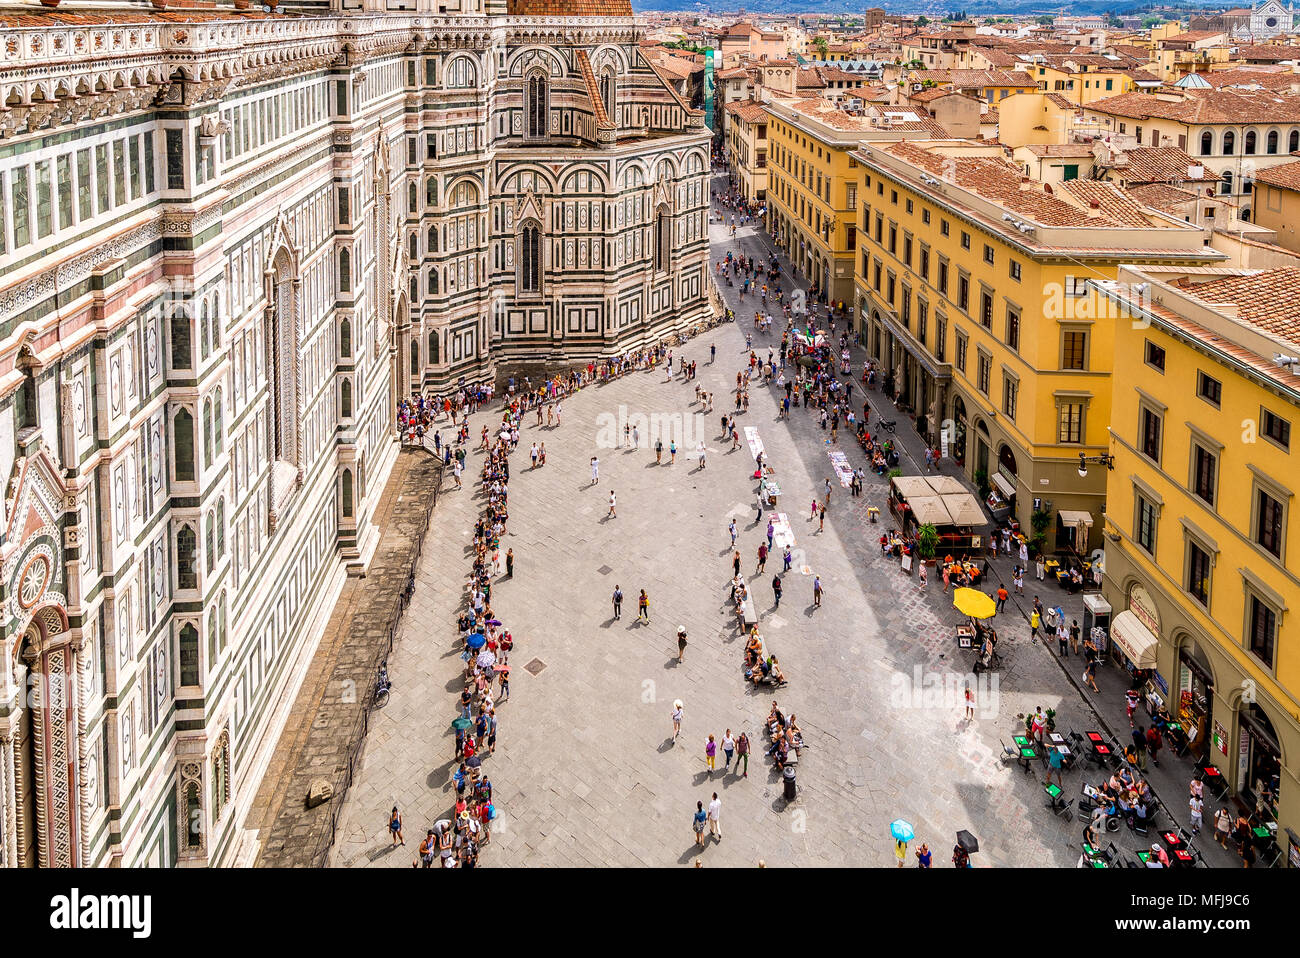 Huge crowds line up to enter bell tower in the Florence Cathedral, more commonly known as the Duomo di Firenze. Stock Photo